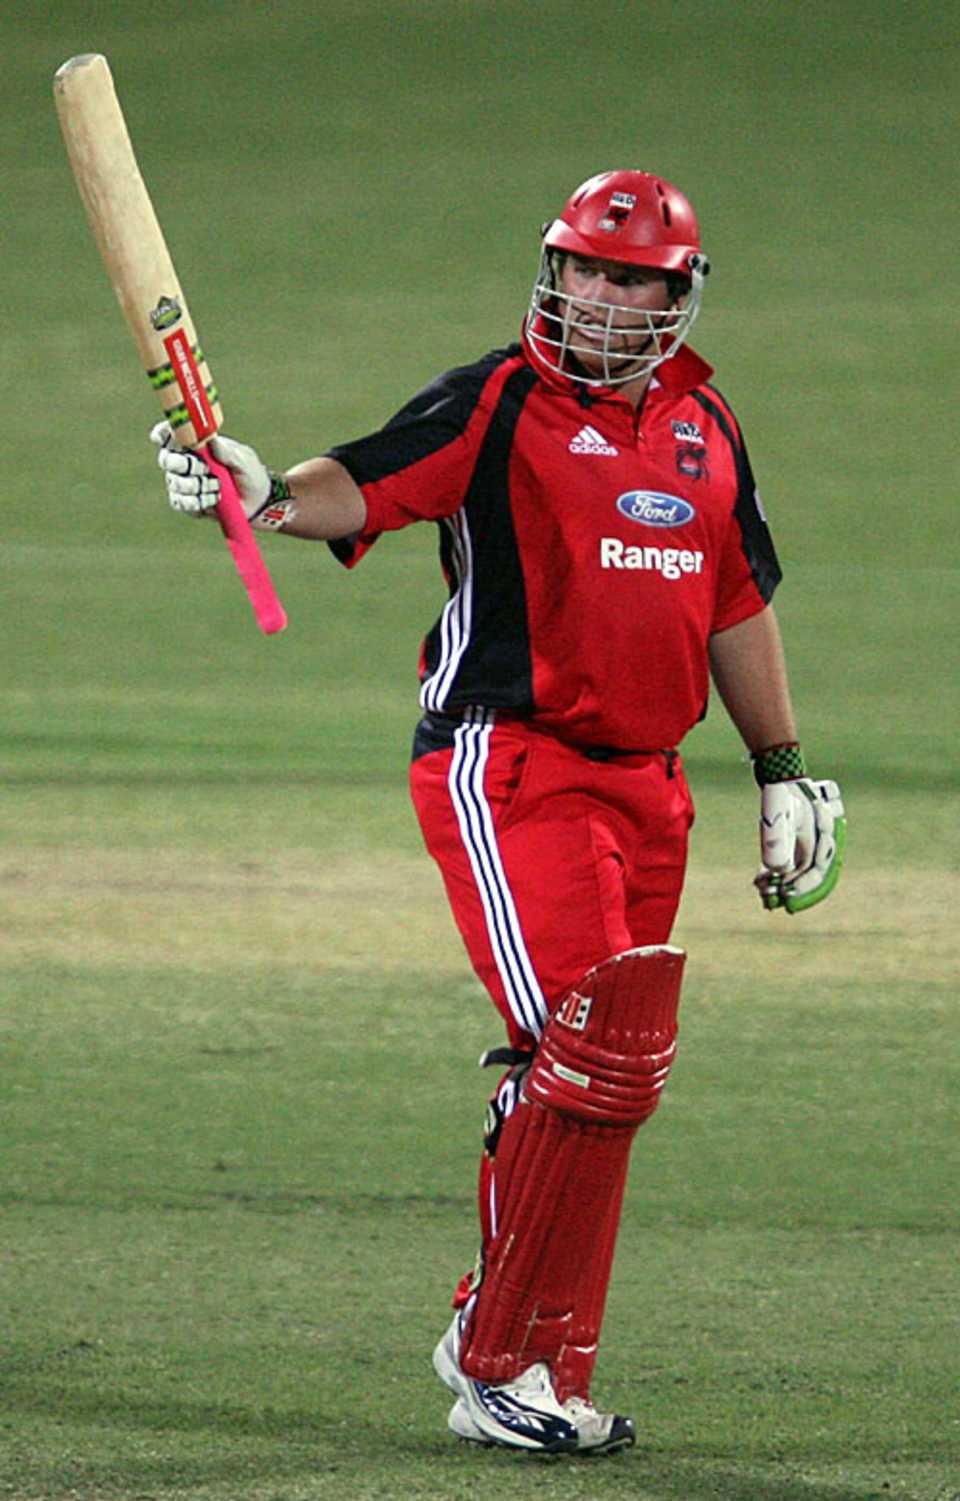 Mark Cosgrove scored 92 in South Australia's chase, South Australia v Victoria, Ford Ranger Cup, Adelaide, October 19, 2007